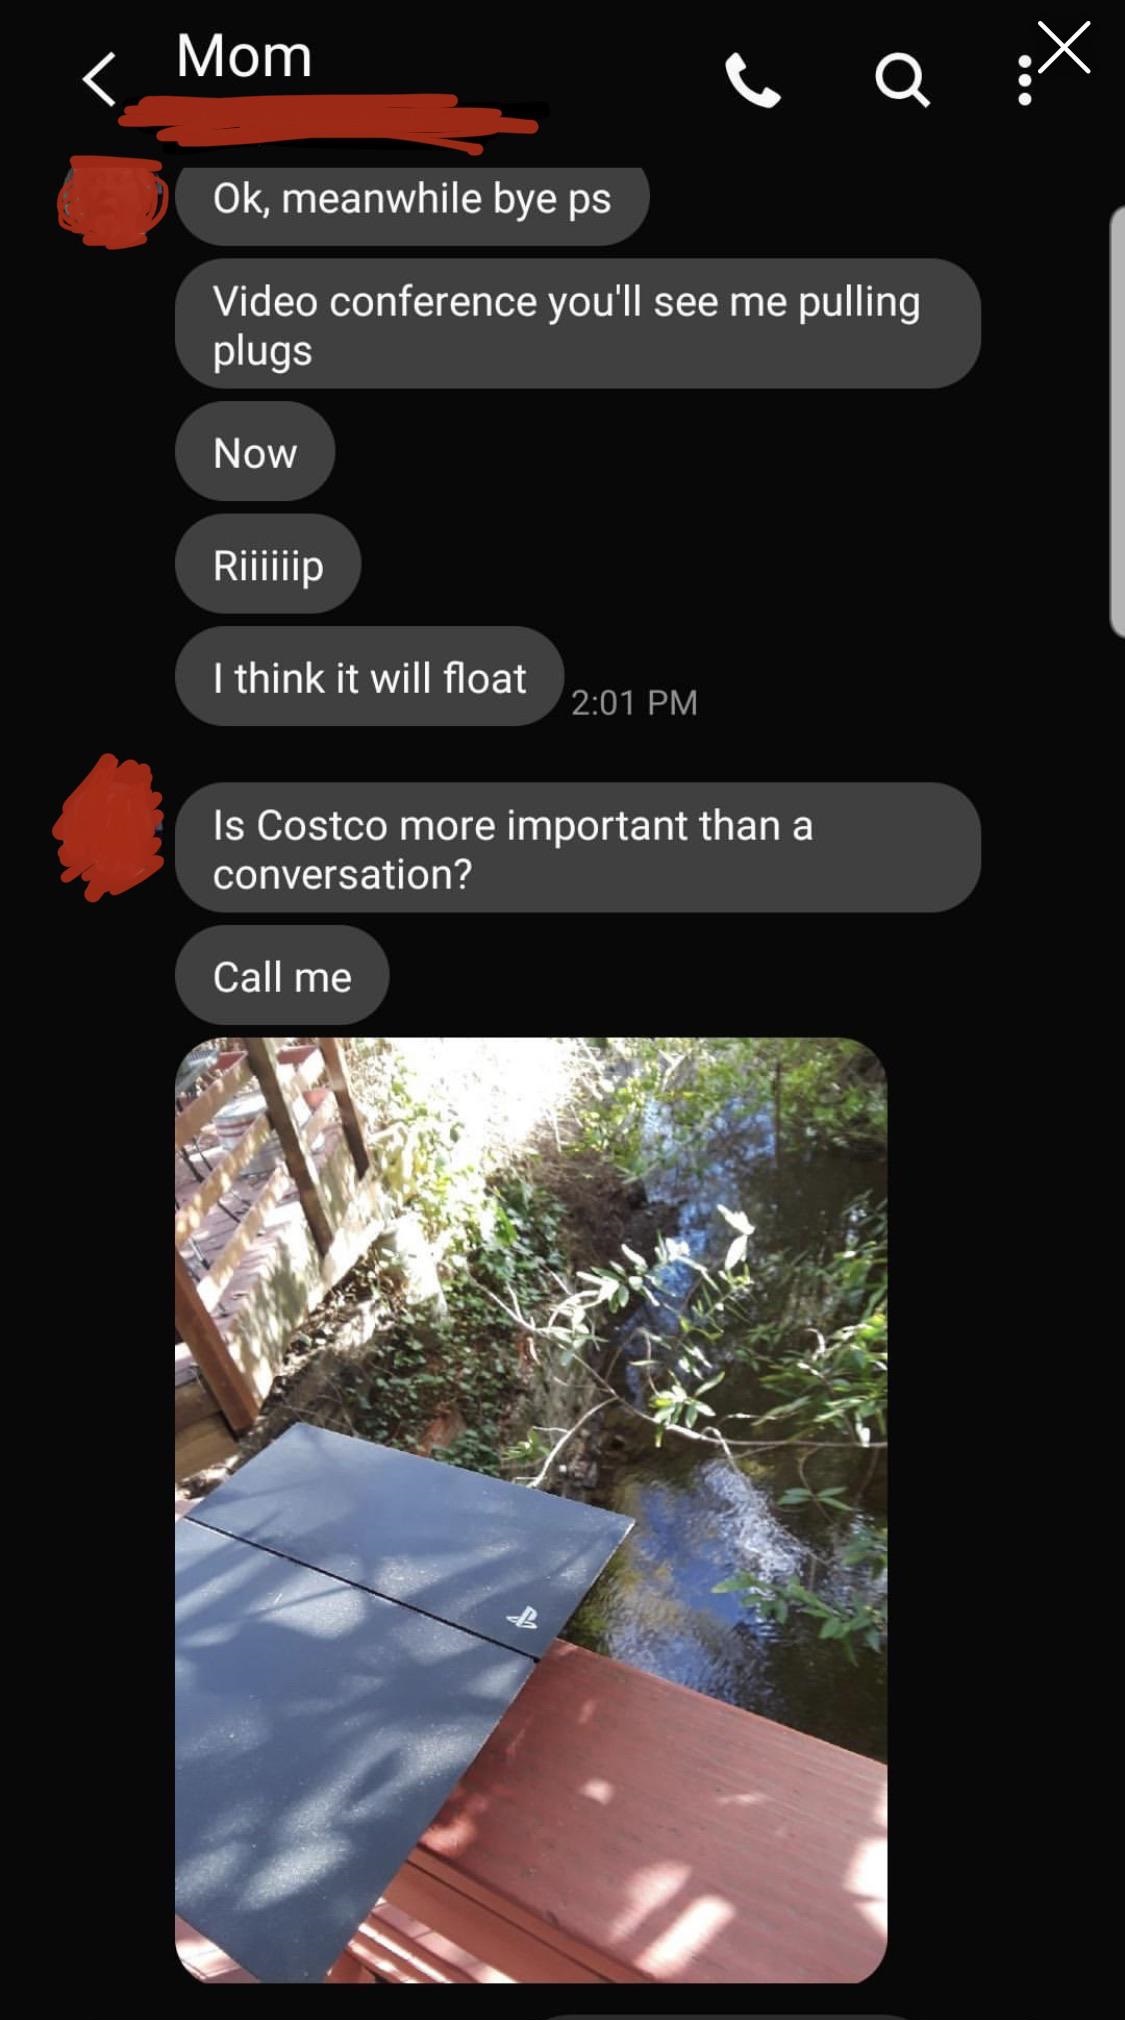 screenshot - Mom Ok, meanwhile bye ps Video conference you'll see me pulling plugs Now Riiiiiip I think it will float 'Is Costco more important than a conversation? Call me